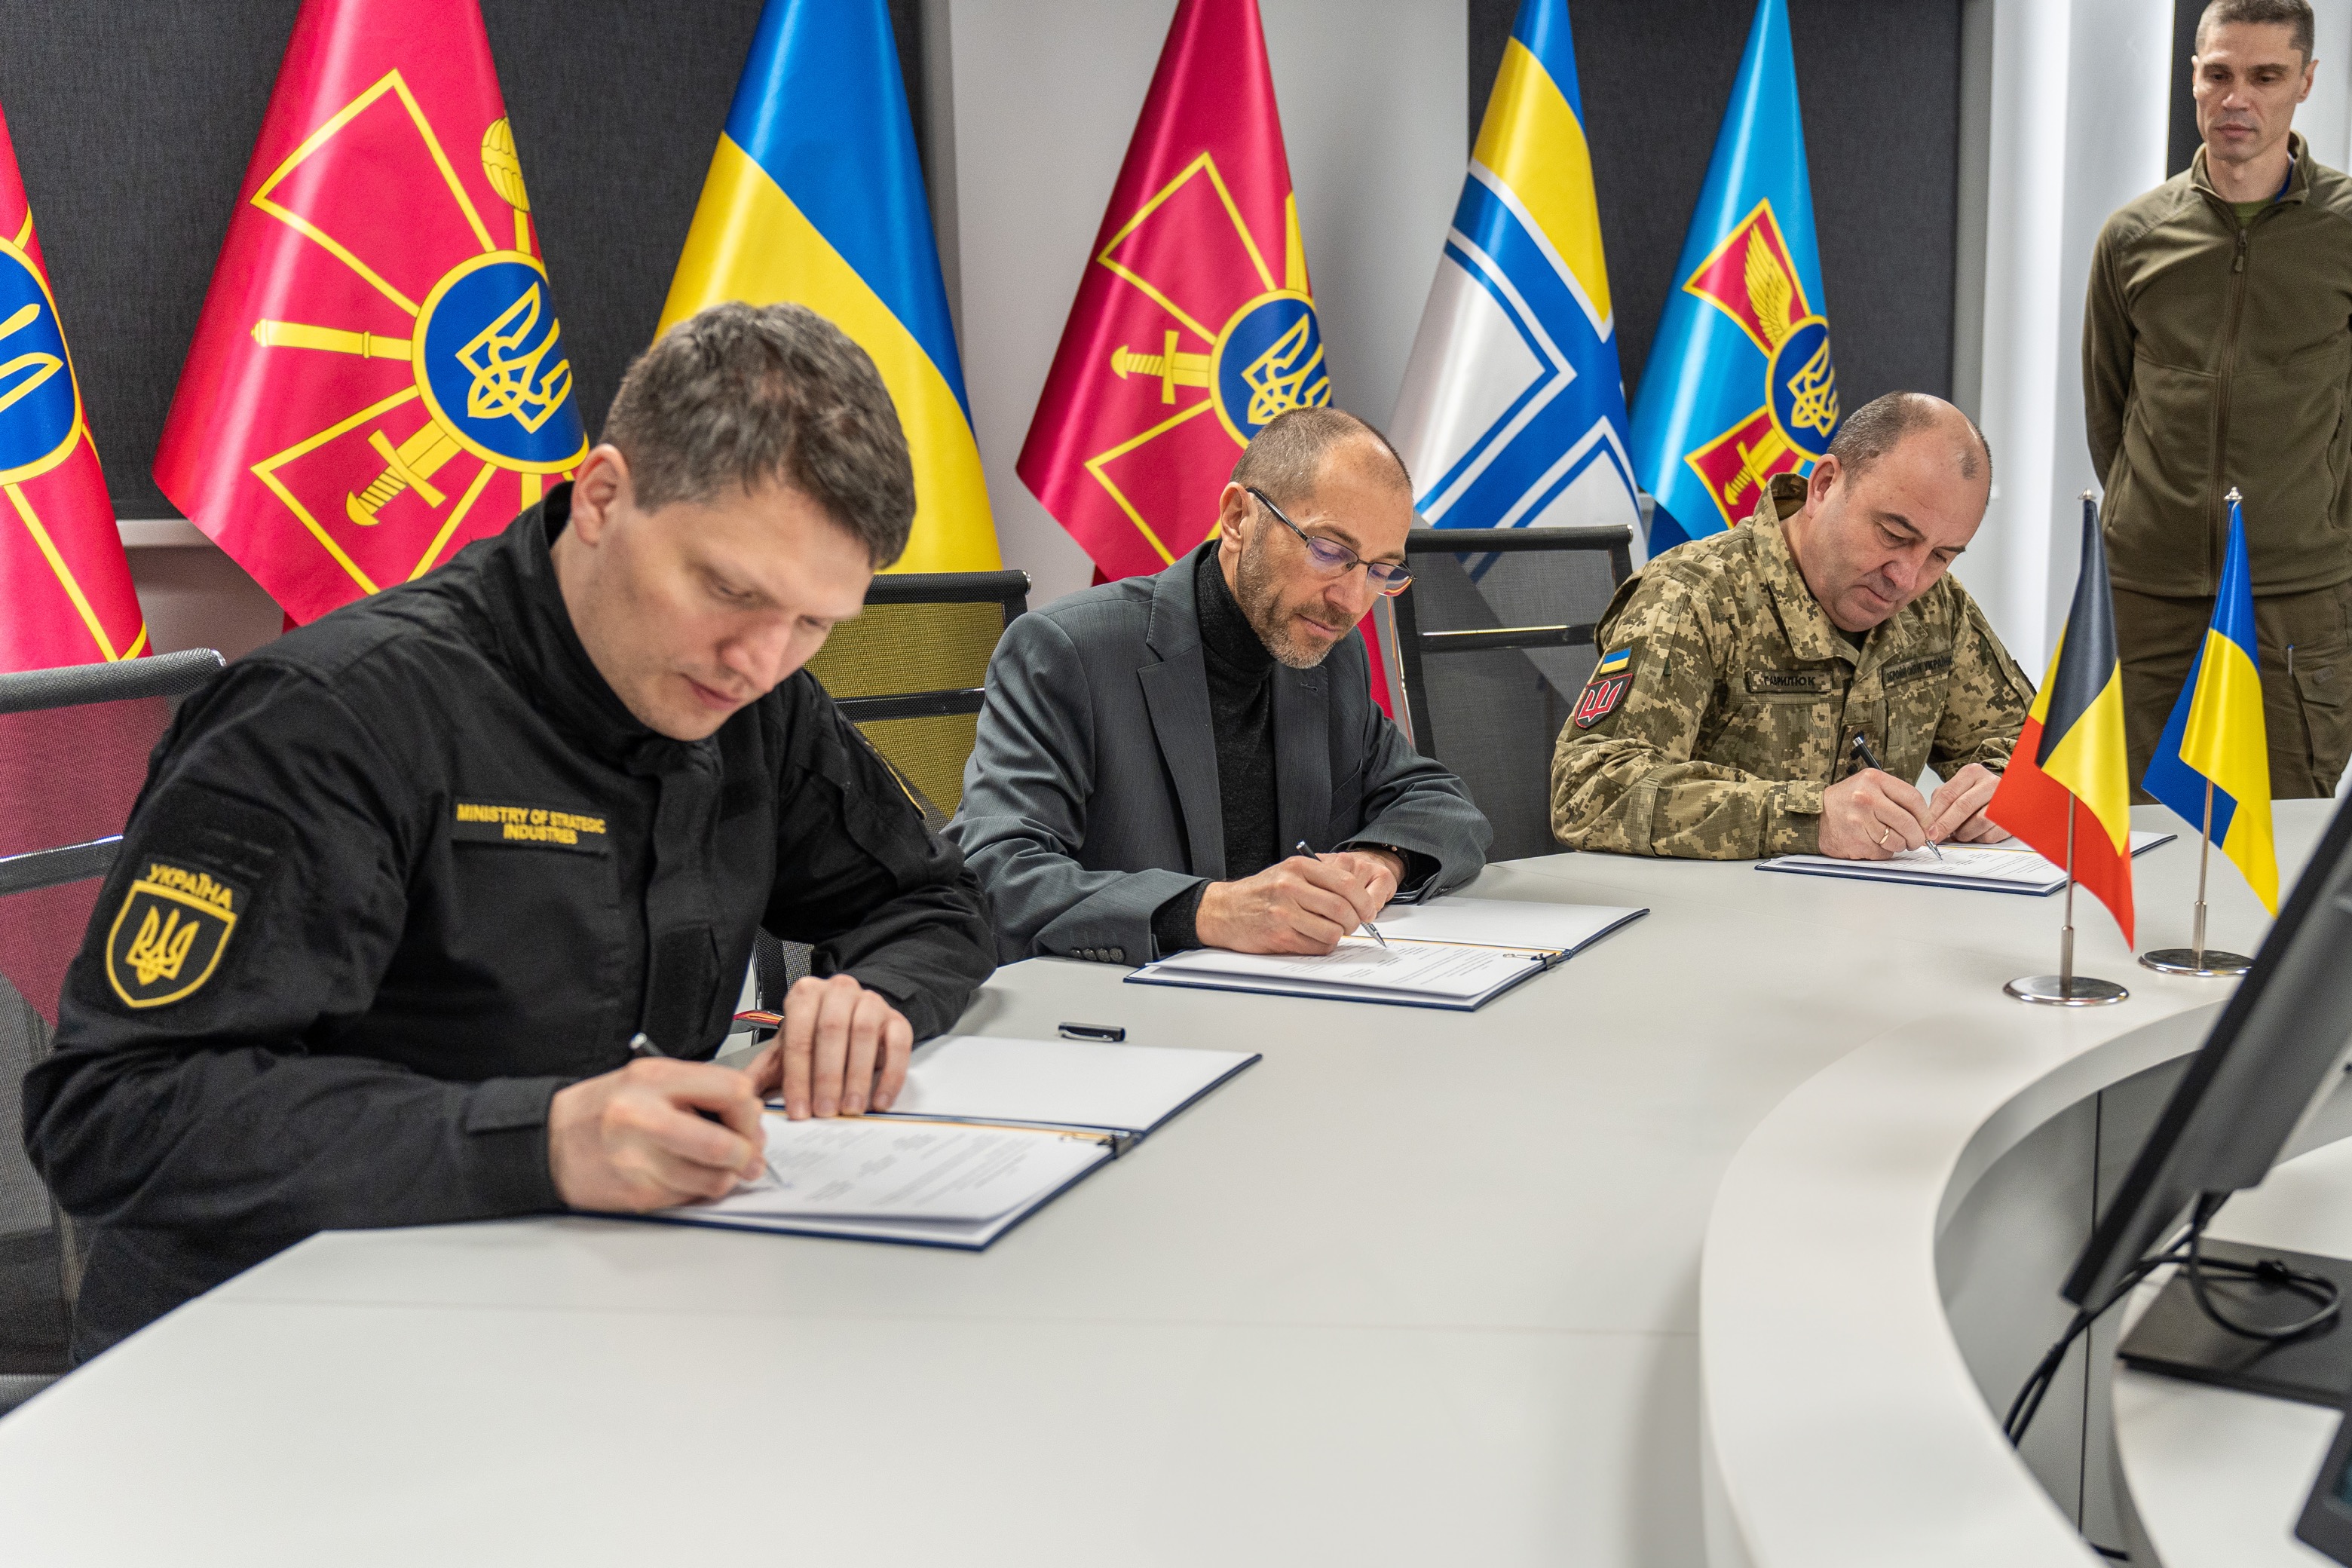 Ukraine and Belgium plan to jointly produce weapons